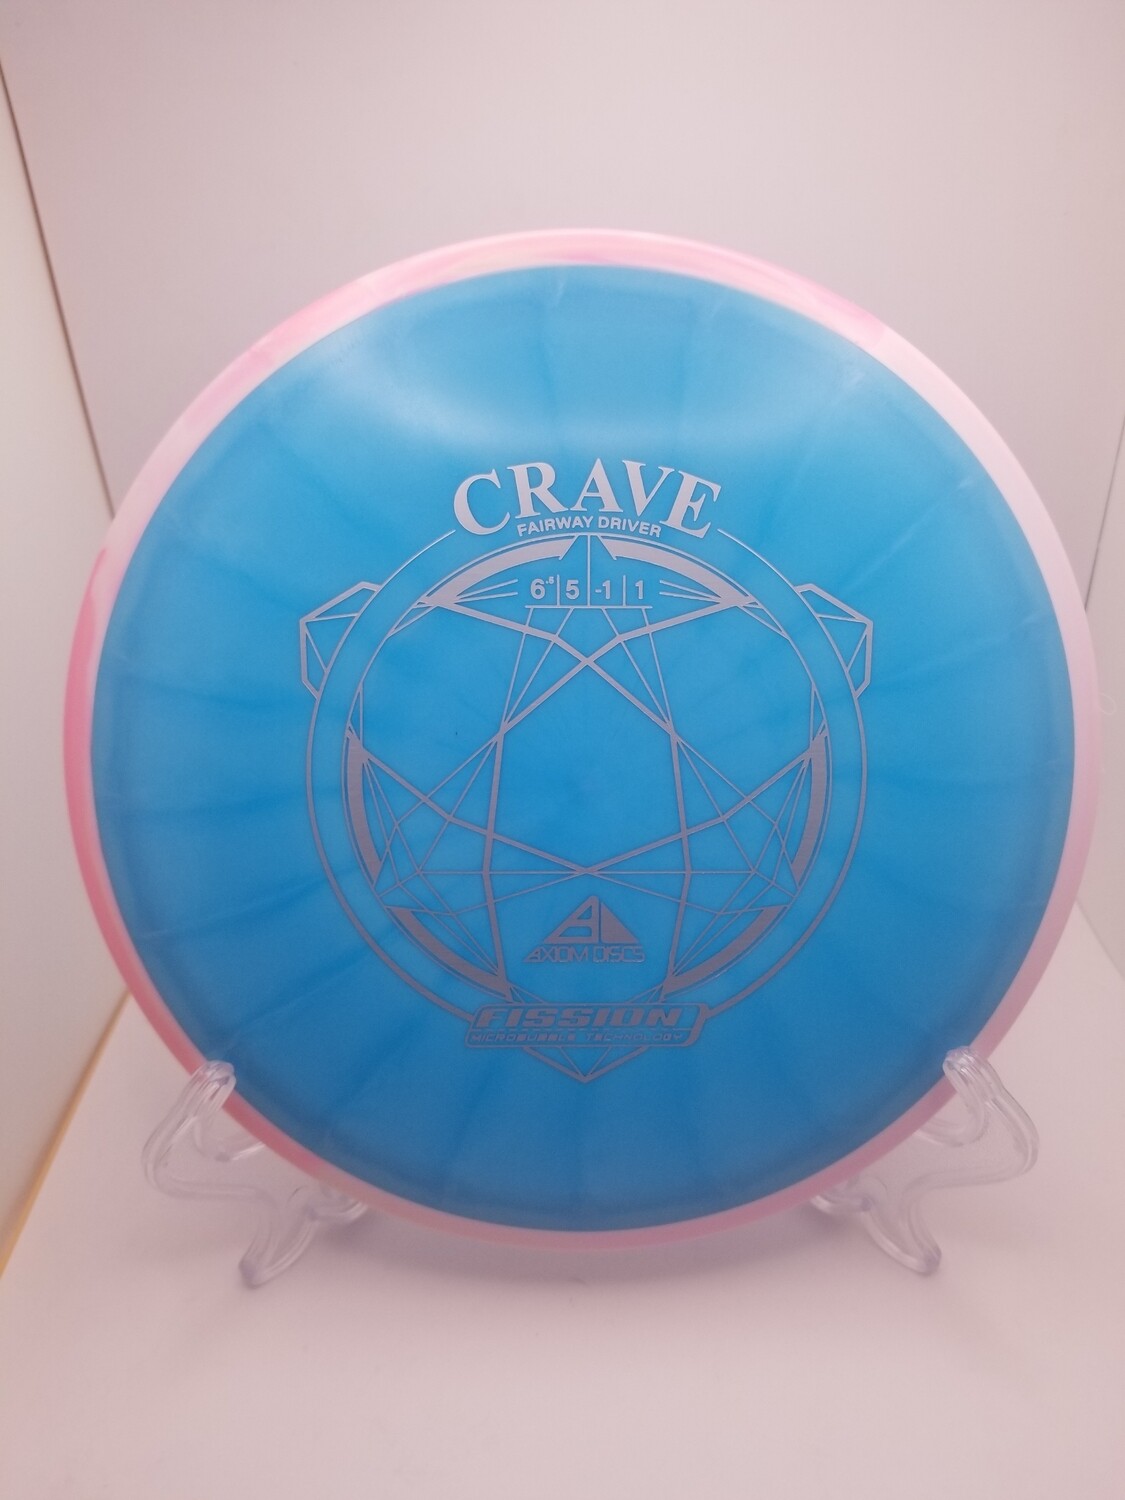 Axiom Discs Crave Baby Blue with Pink Swirly Rim Fission Stamped 152g